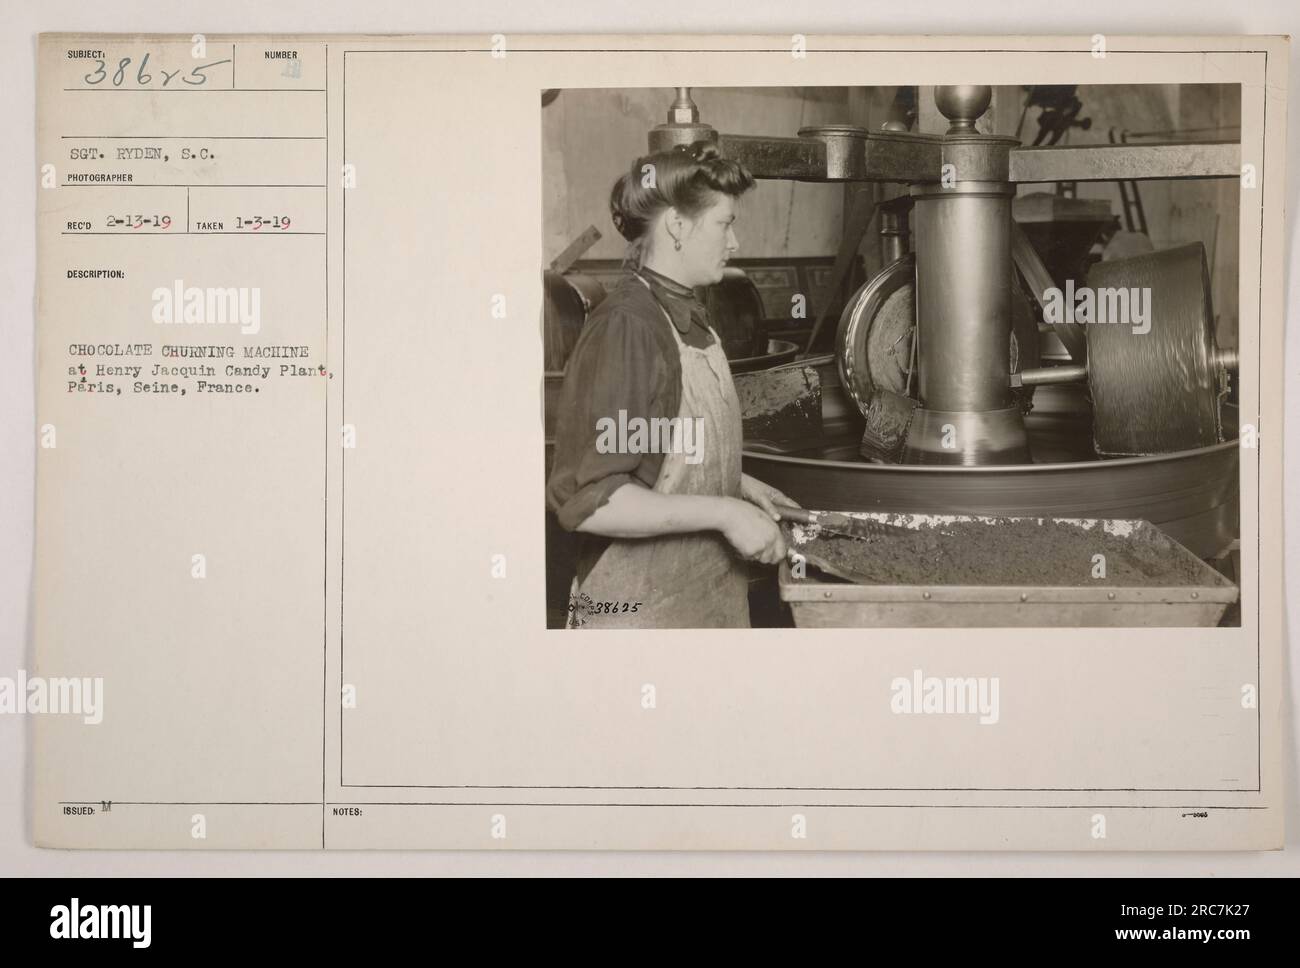 Sgt. Ryden captured an image on 1-3-19 of a chocolate churning machine at the Henry Jacquin Candy Plant in Peris, Seine, France. This photograph is marked with the label 111-SC-38625 and shows the photographer's Subiect as S.C. Stock Photo